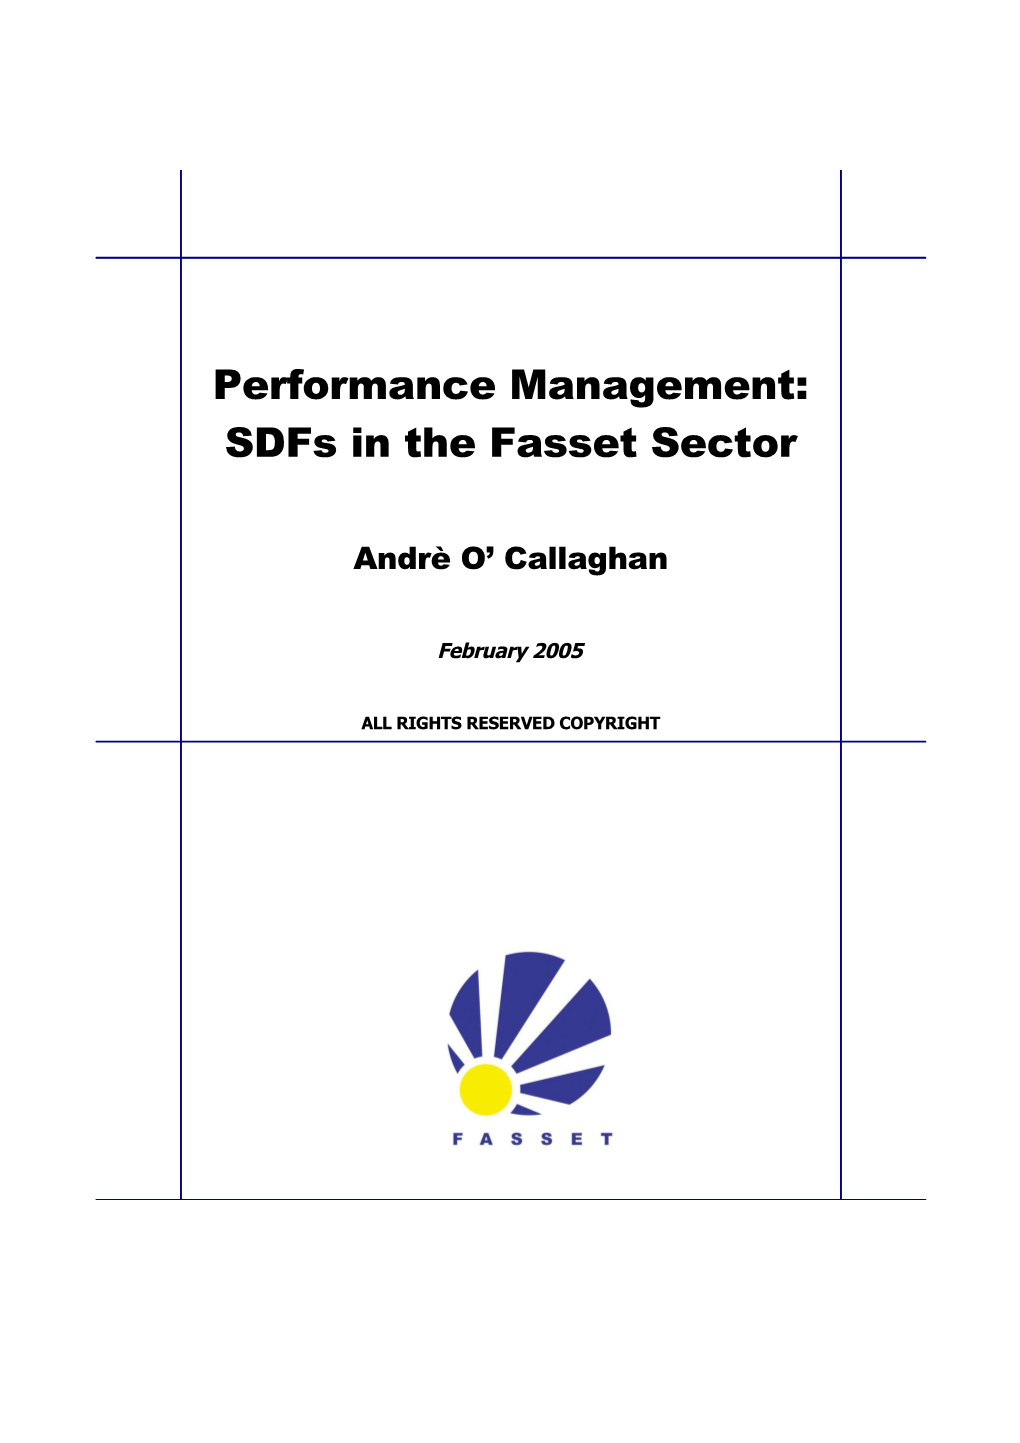 Performance Management an Introduction for Skills Development Facilitators in the Financial